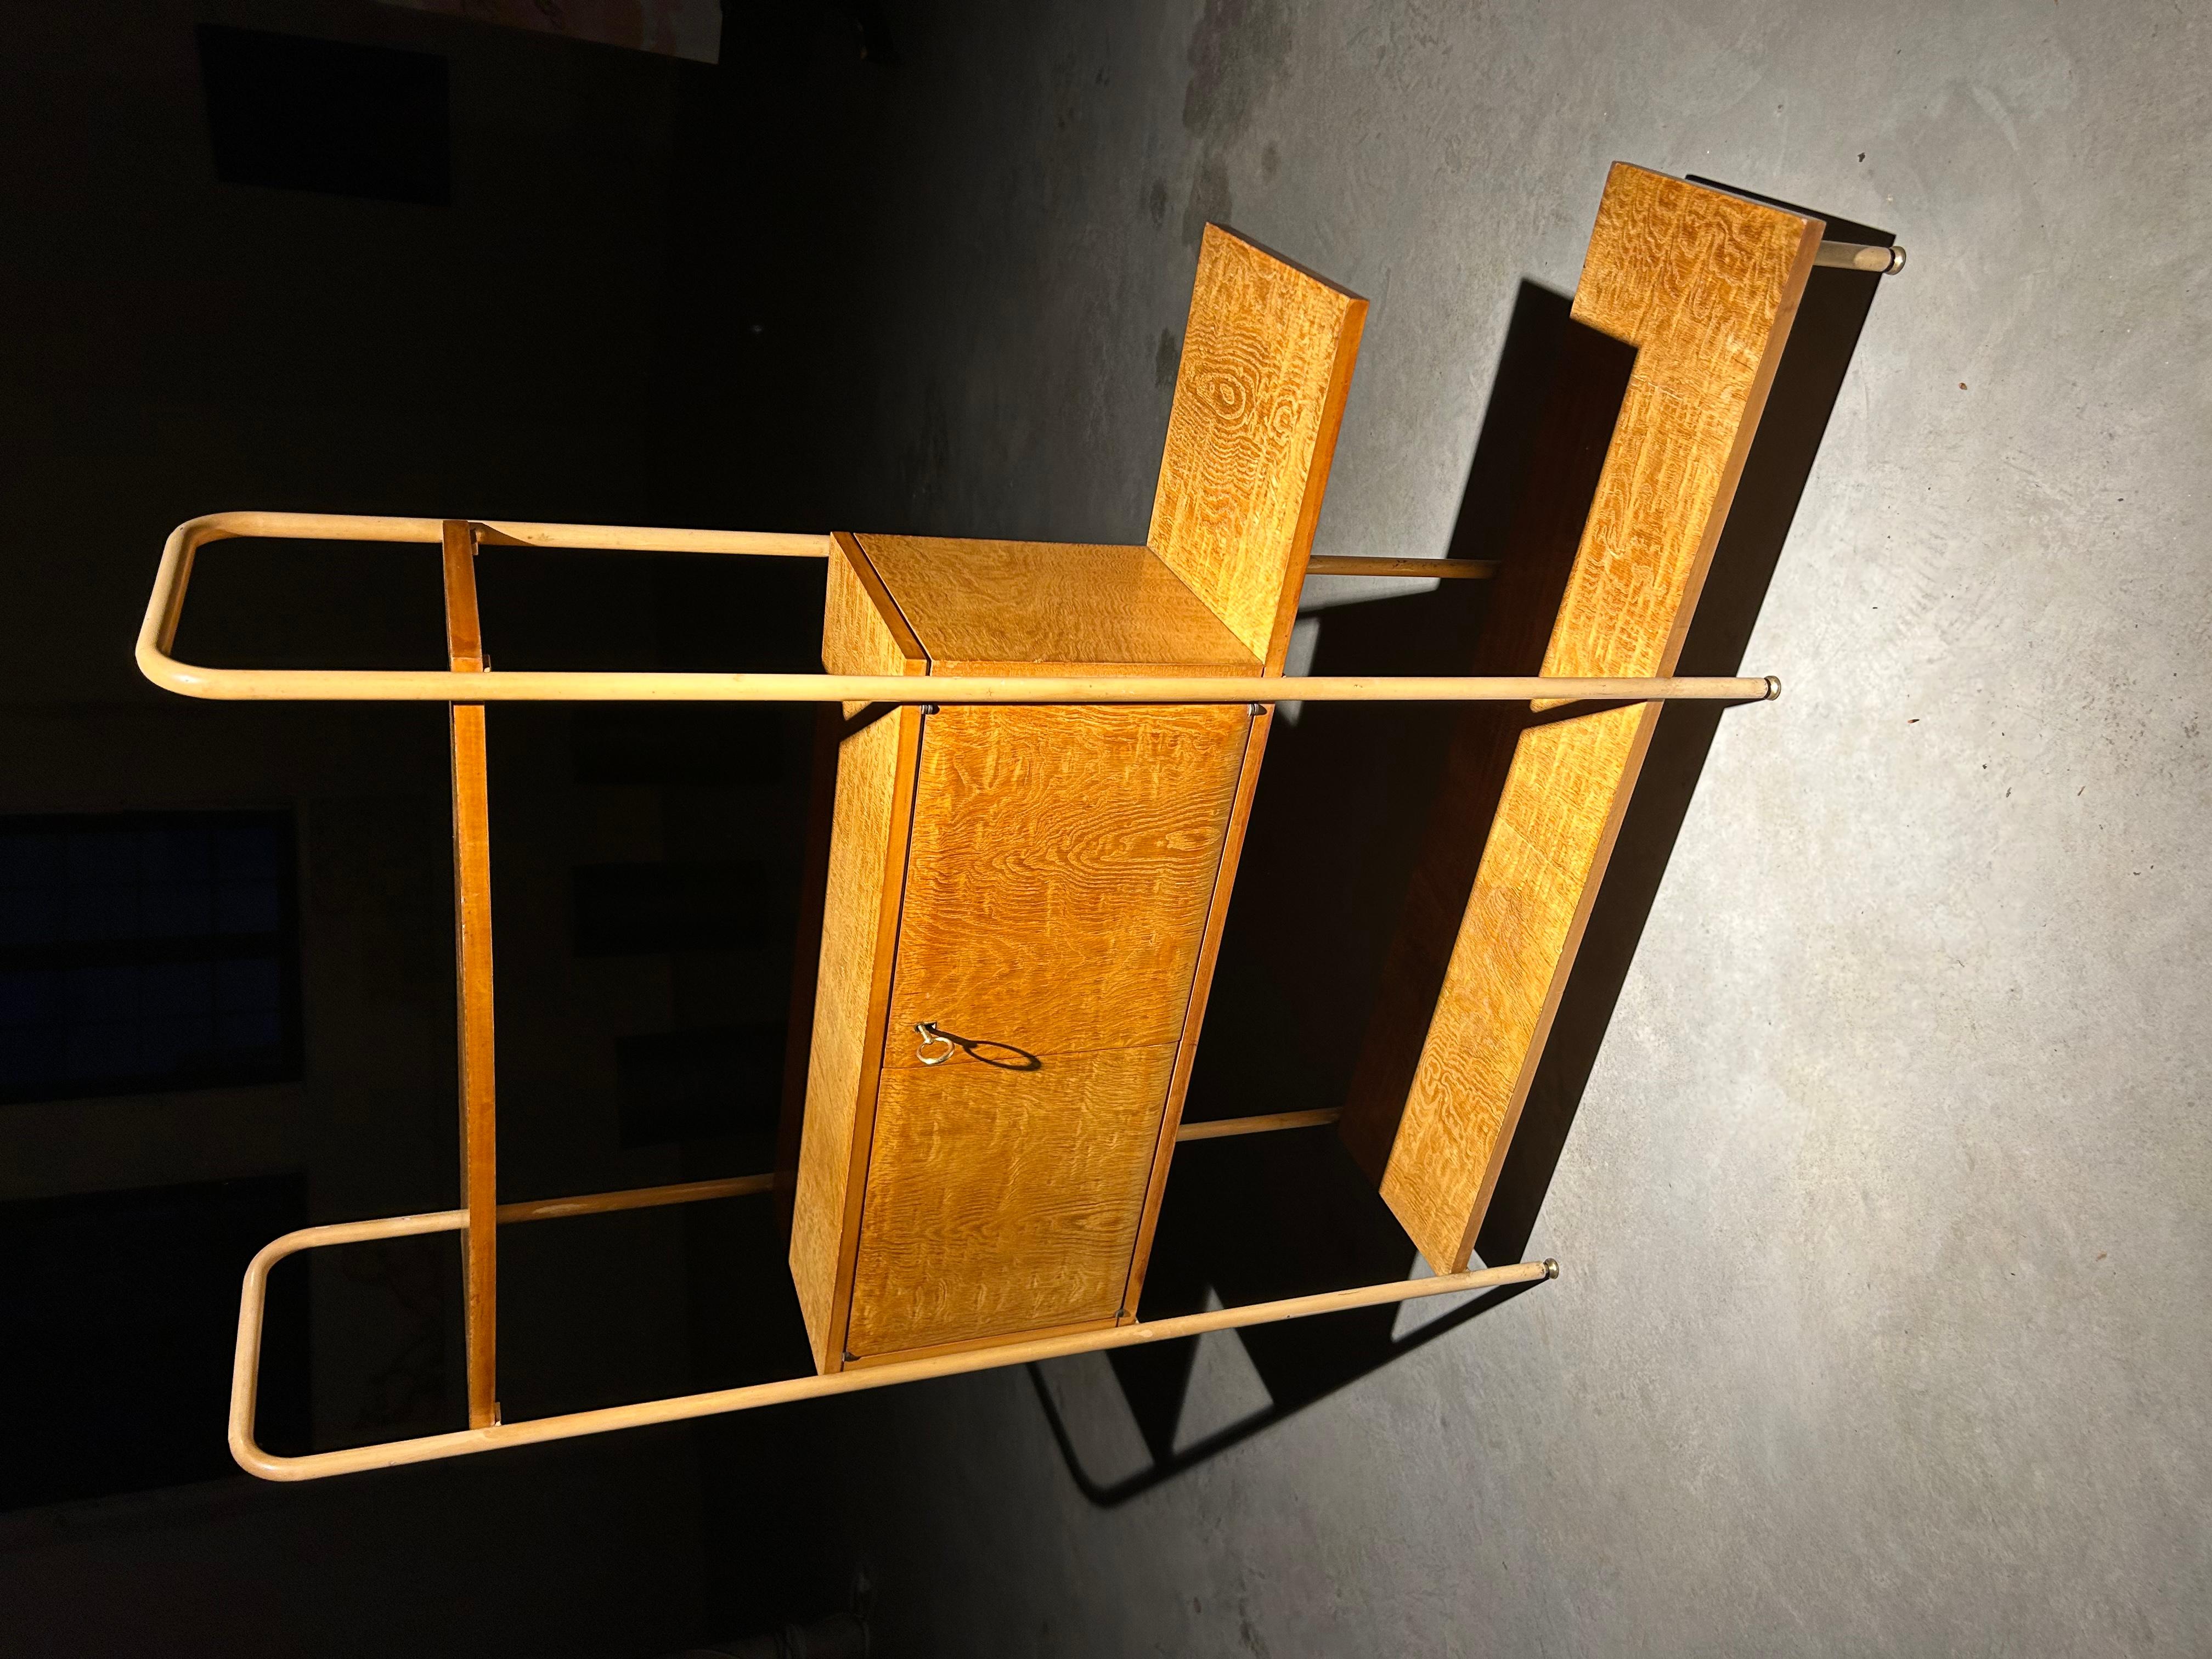 Nice and sculptural italian 1960’s shelf In rosewood.
There is two doors With à Nice key.
